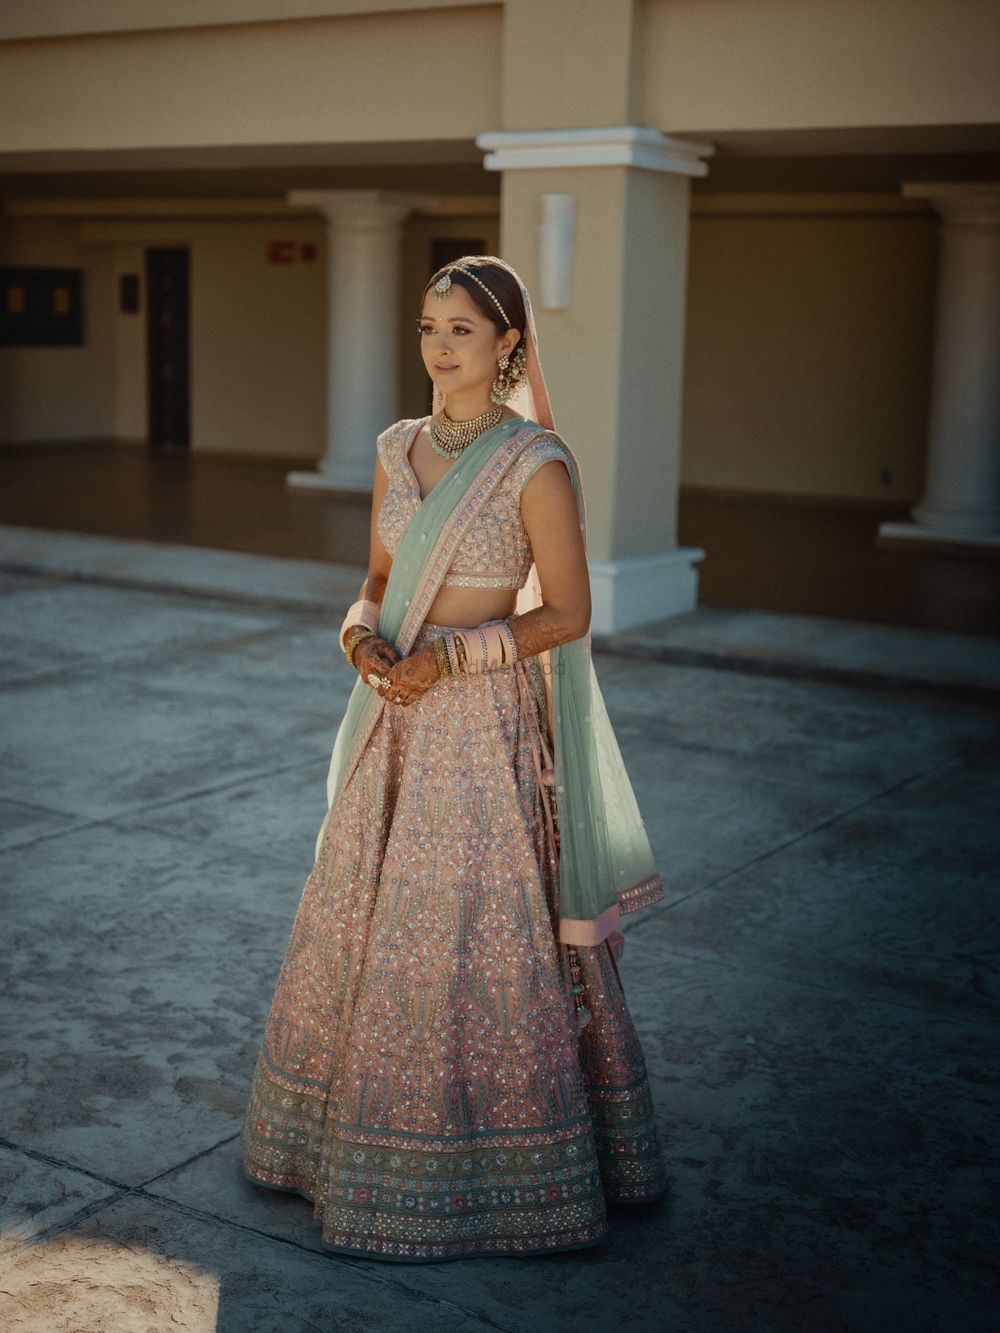 Photo of bride in a pretty pastel anita dongre lehenga with contrasting dupatta